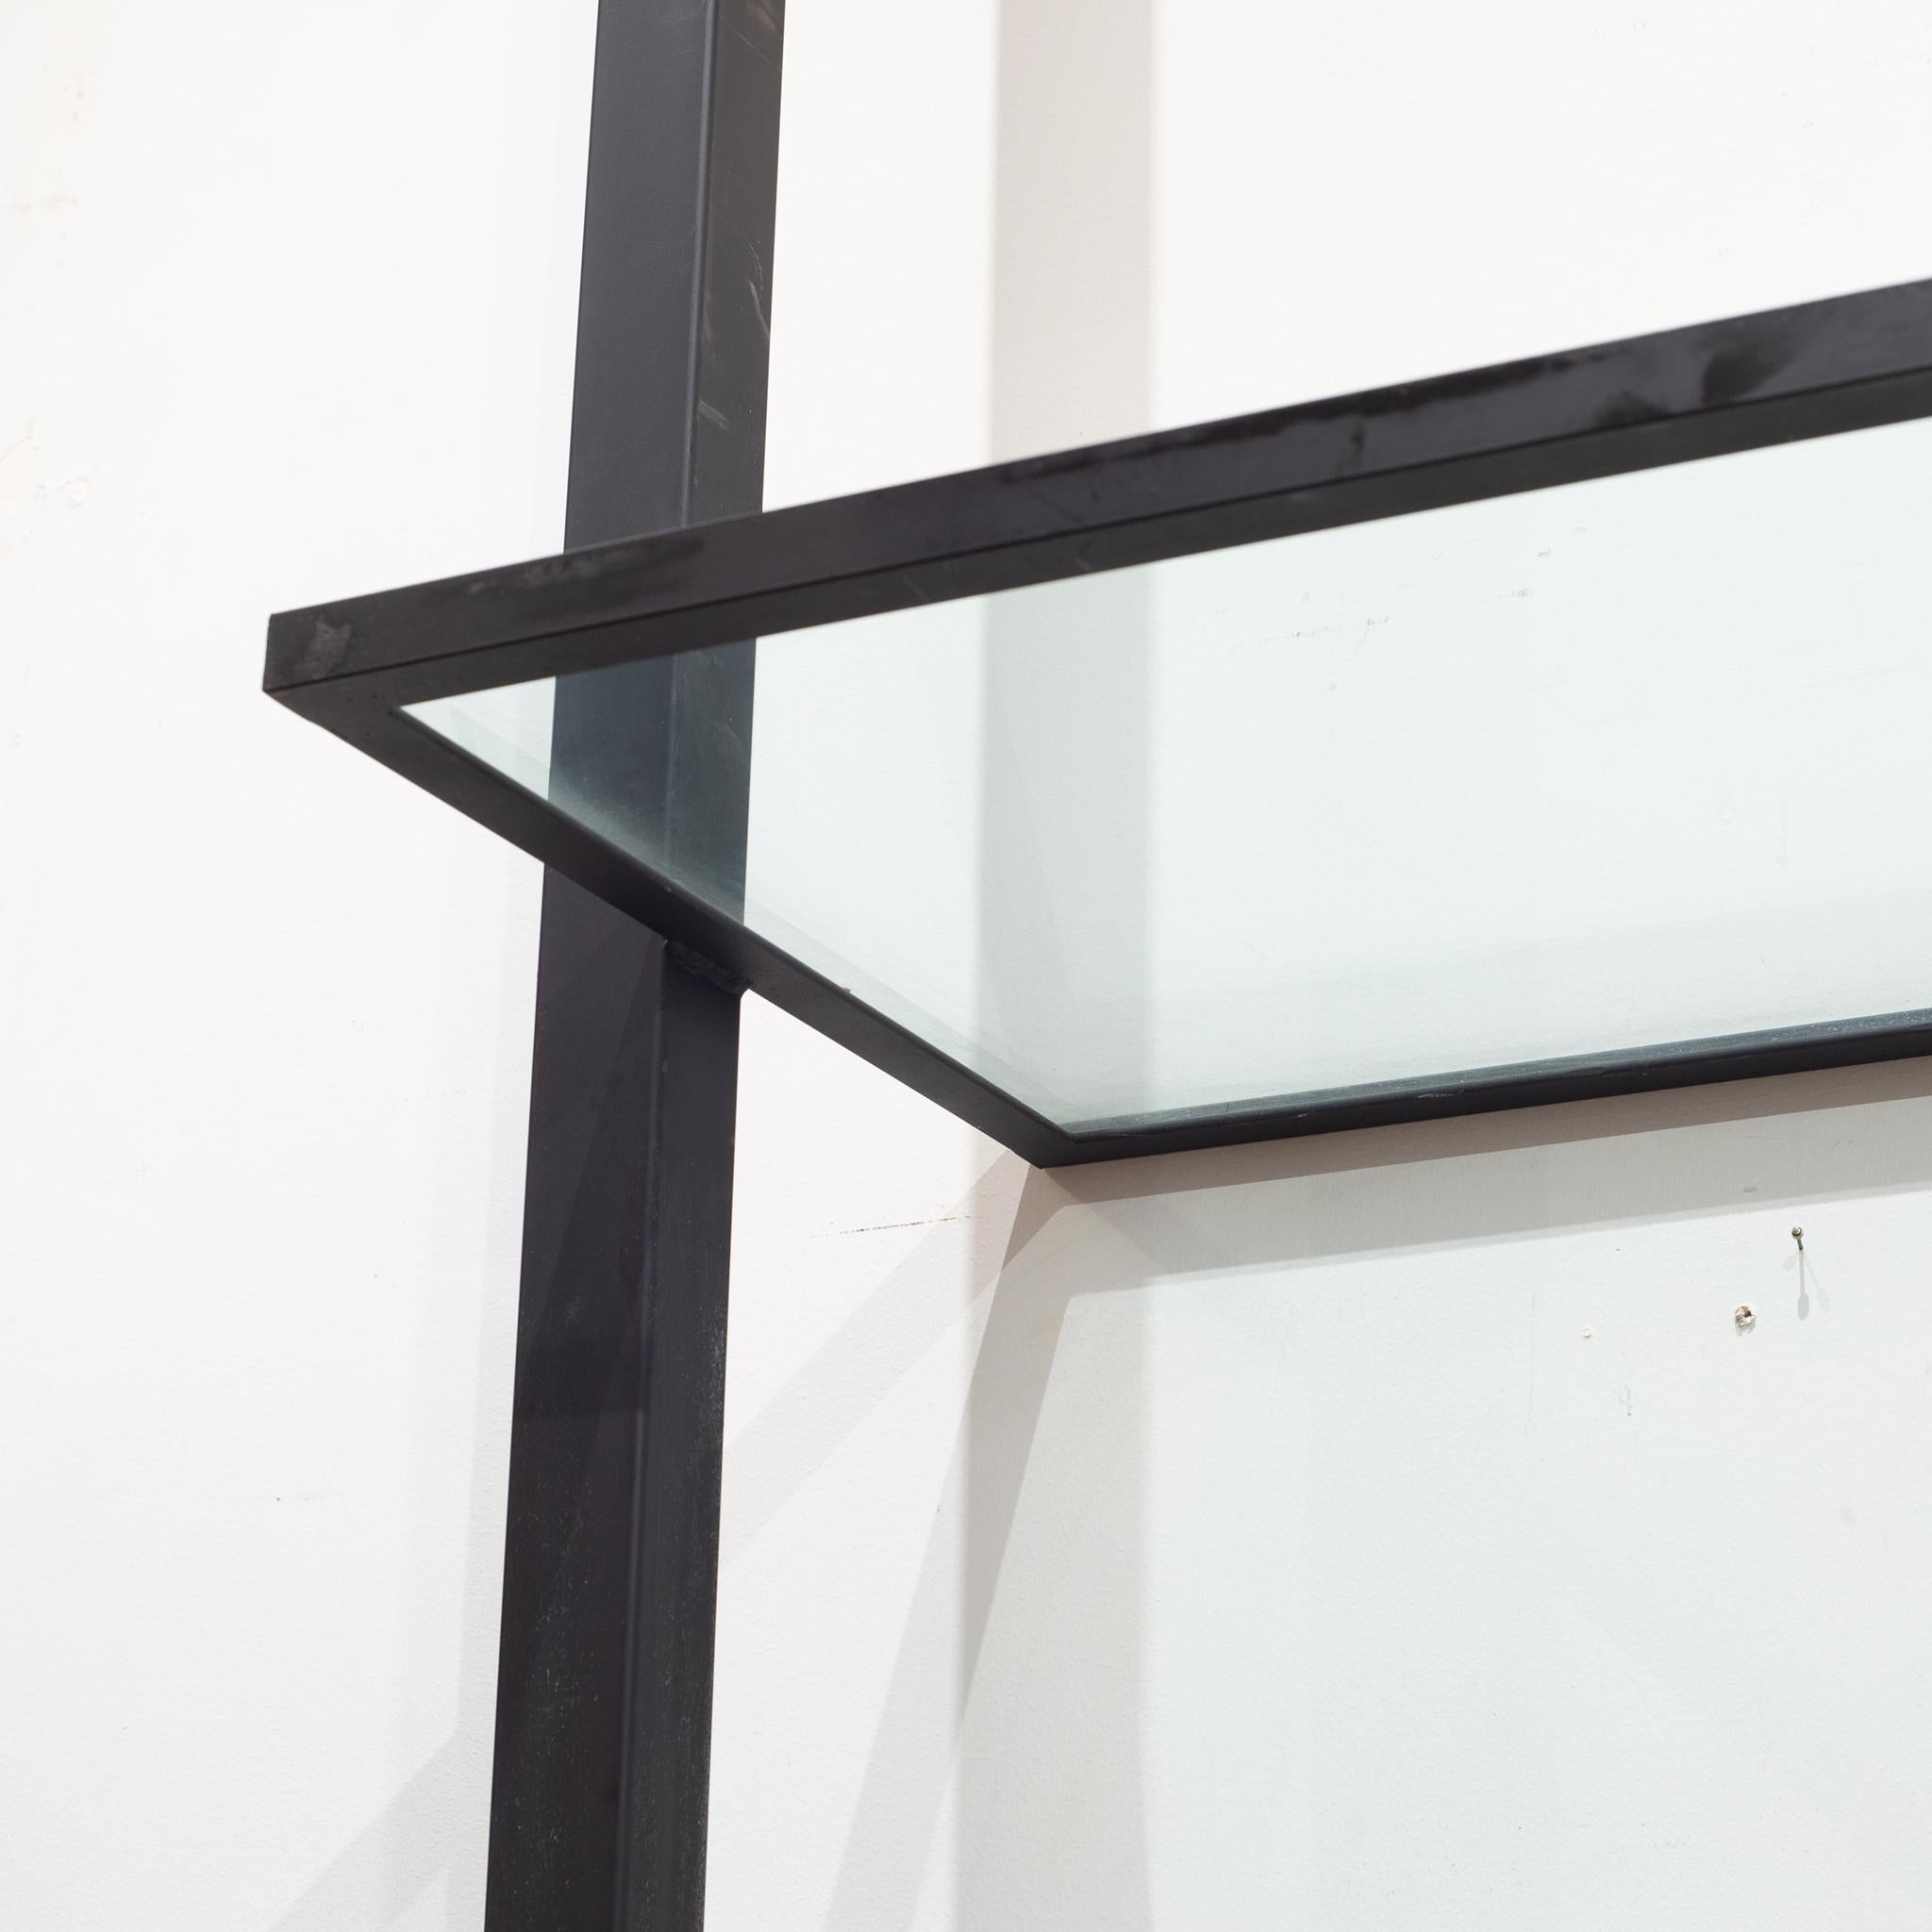 Large Custom Floating Steel and Glass Shelf c. 2014 In Good Condition For Sale In San Francisco, CA